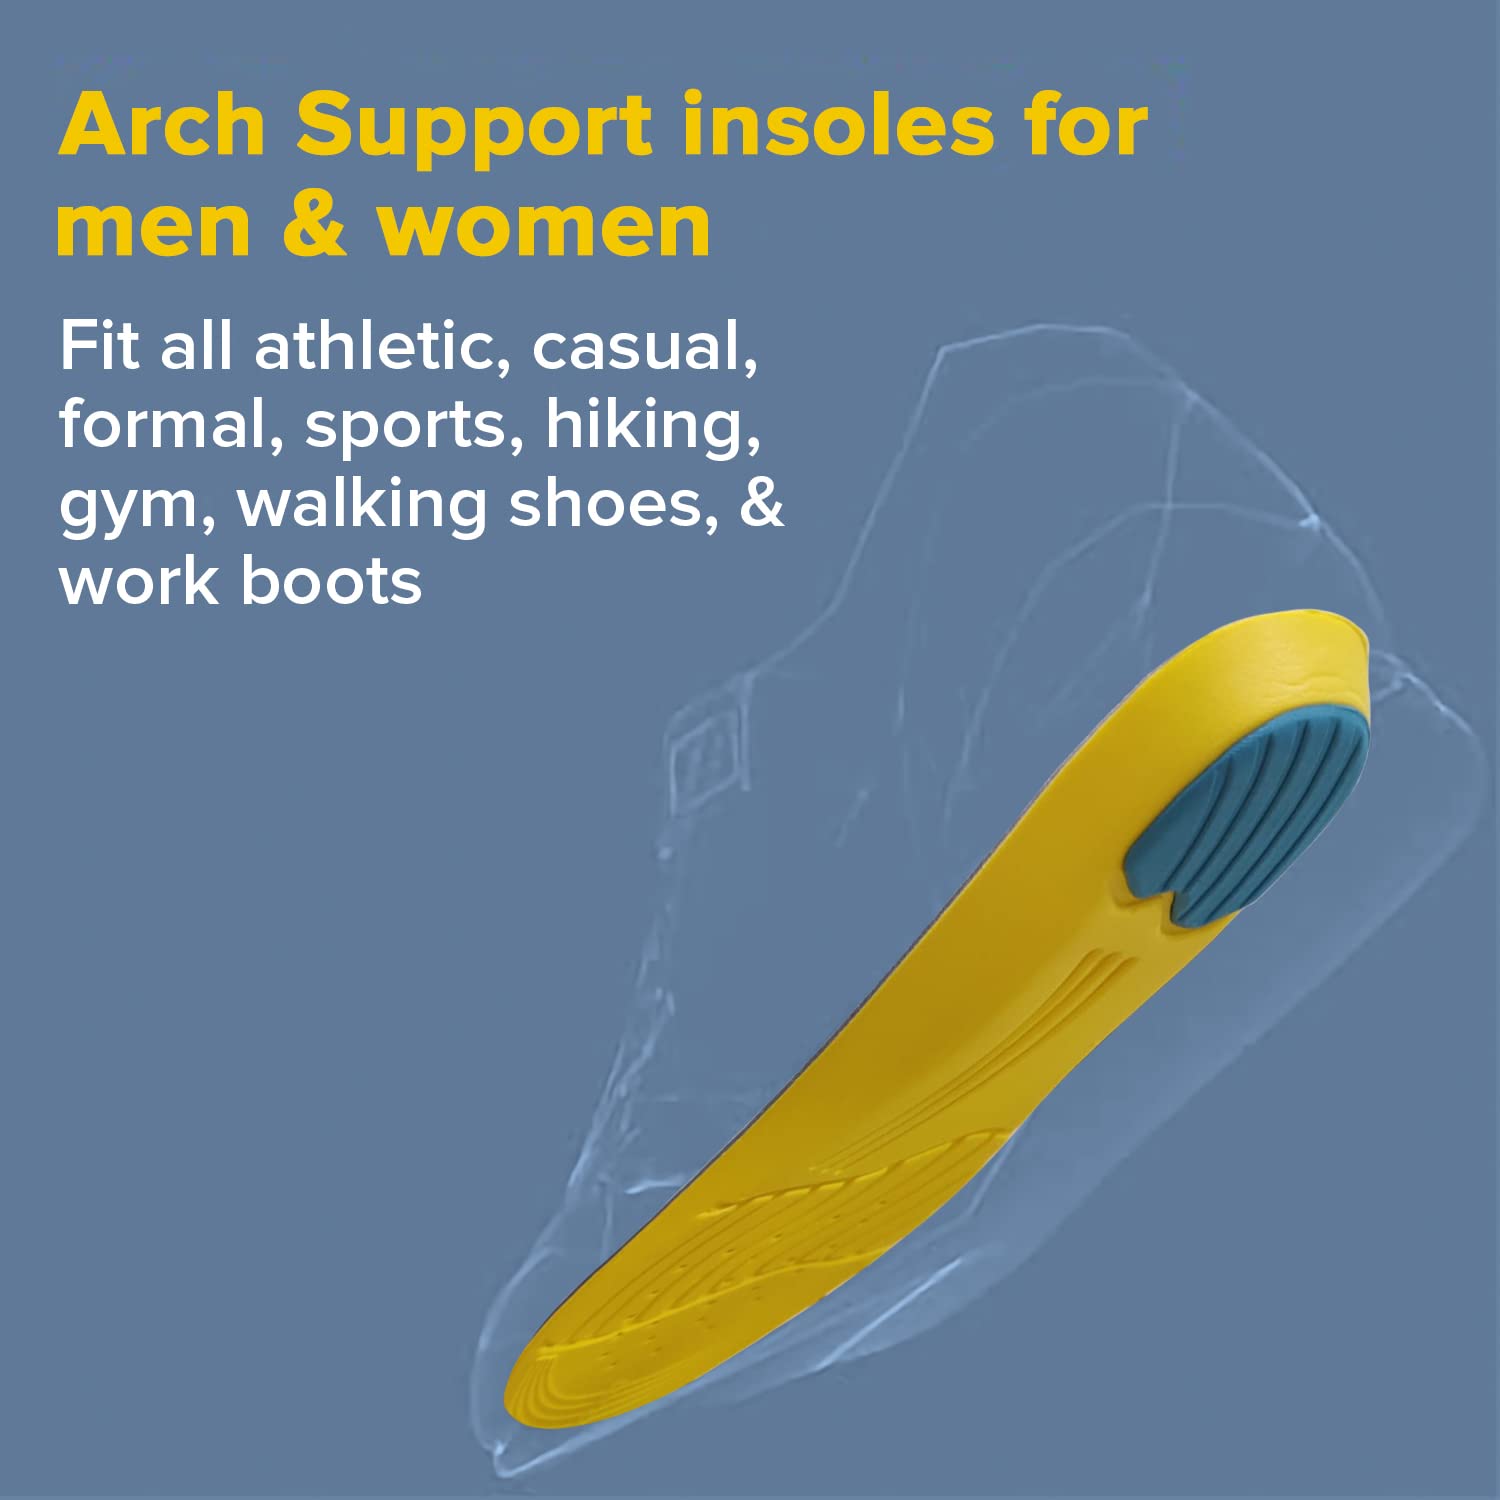 Dr Foot Gel Insoles Pair | For Walking, Running Shoes | All Day Comfort Shoe Inserts With Dual Gel Technology | Ideal Full-Length Sole For Every Shoe | For Both Men & Women - 1 Pair (Free) (Pack of 2)